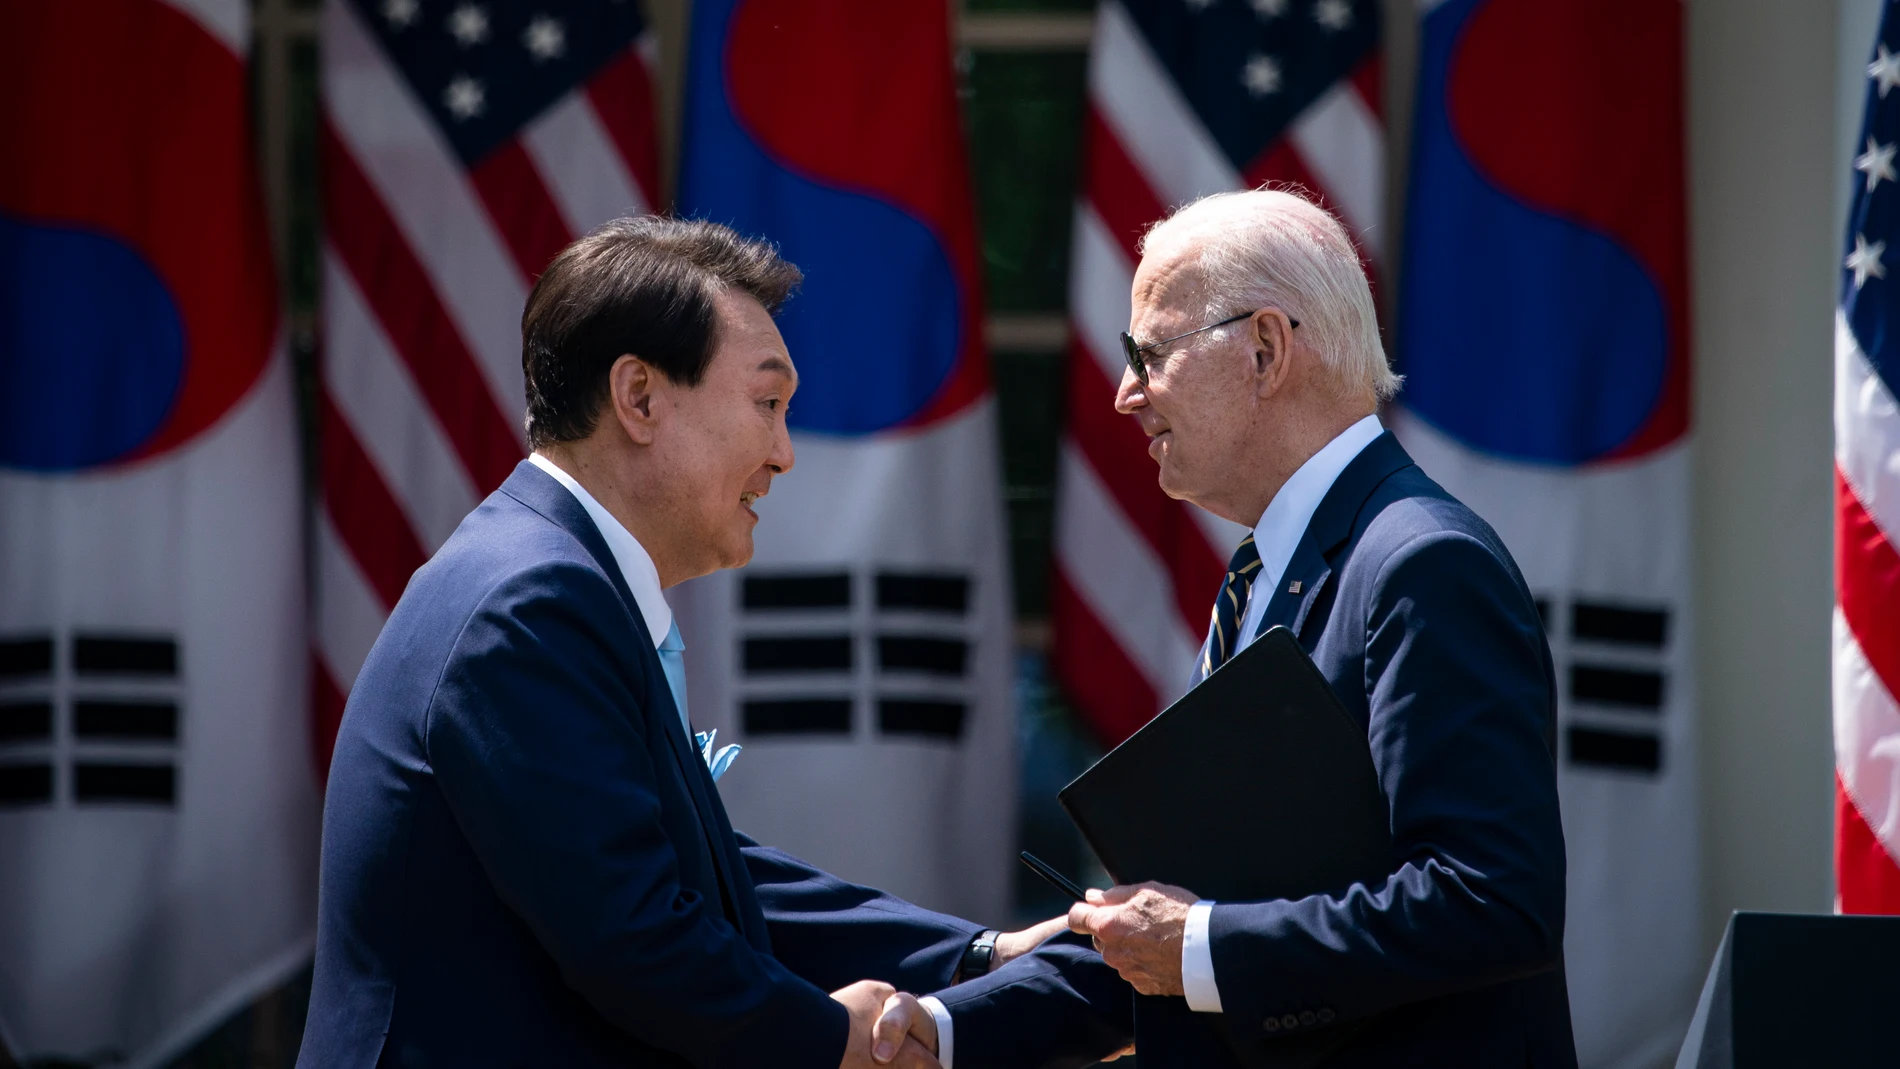 Washington (United States), 26/04/2023.- US President Joe Biden (R) and South Korean President Yoon Suk Yeol (L) shake hands at a joint press conference in the Rose Garden of the White House in Washington, DC, USA, 26 April 2023. Yoon is on the second day of a three-day visit to DC, which includes addressing a joint meeting of Congress and a tour of NASA's Goddard Space Flight Center. (Corea del Sur, Estados Unidos) EFE/EPA/AL DRAGO / POOL 